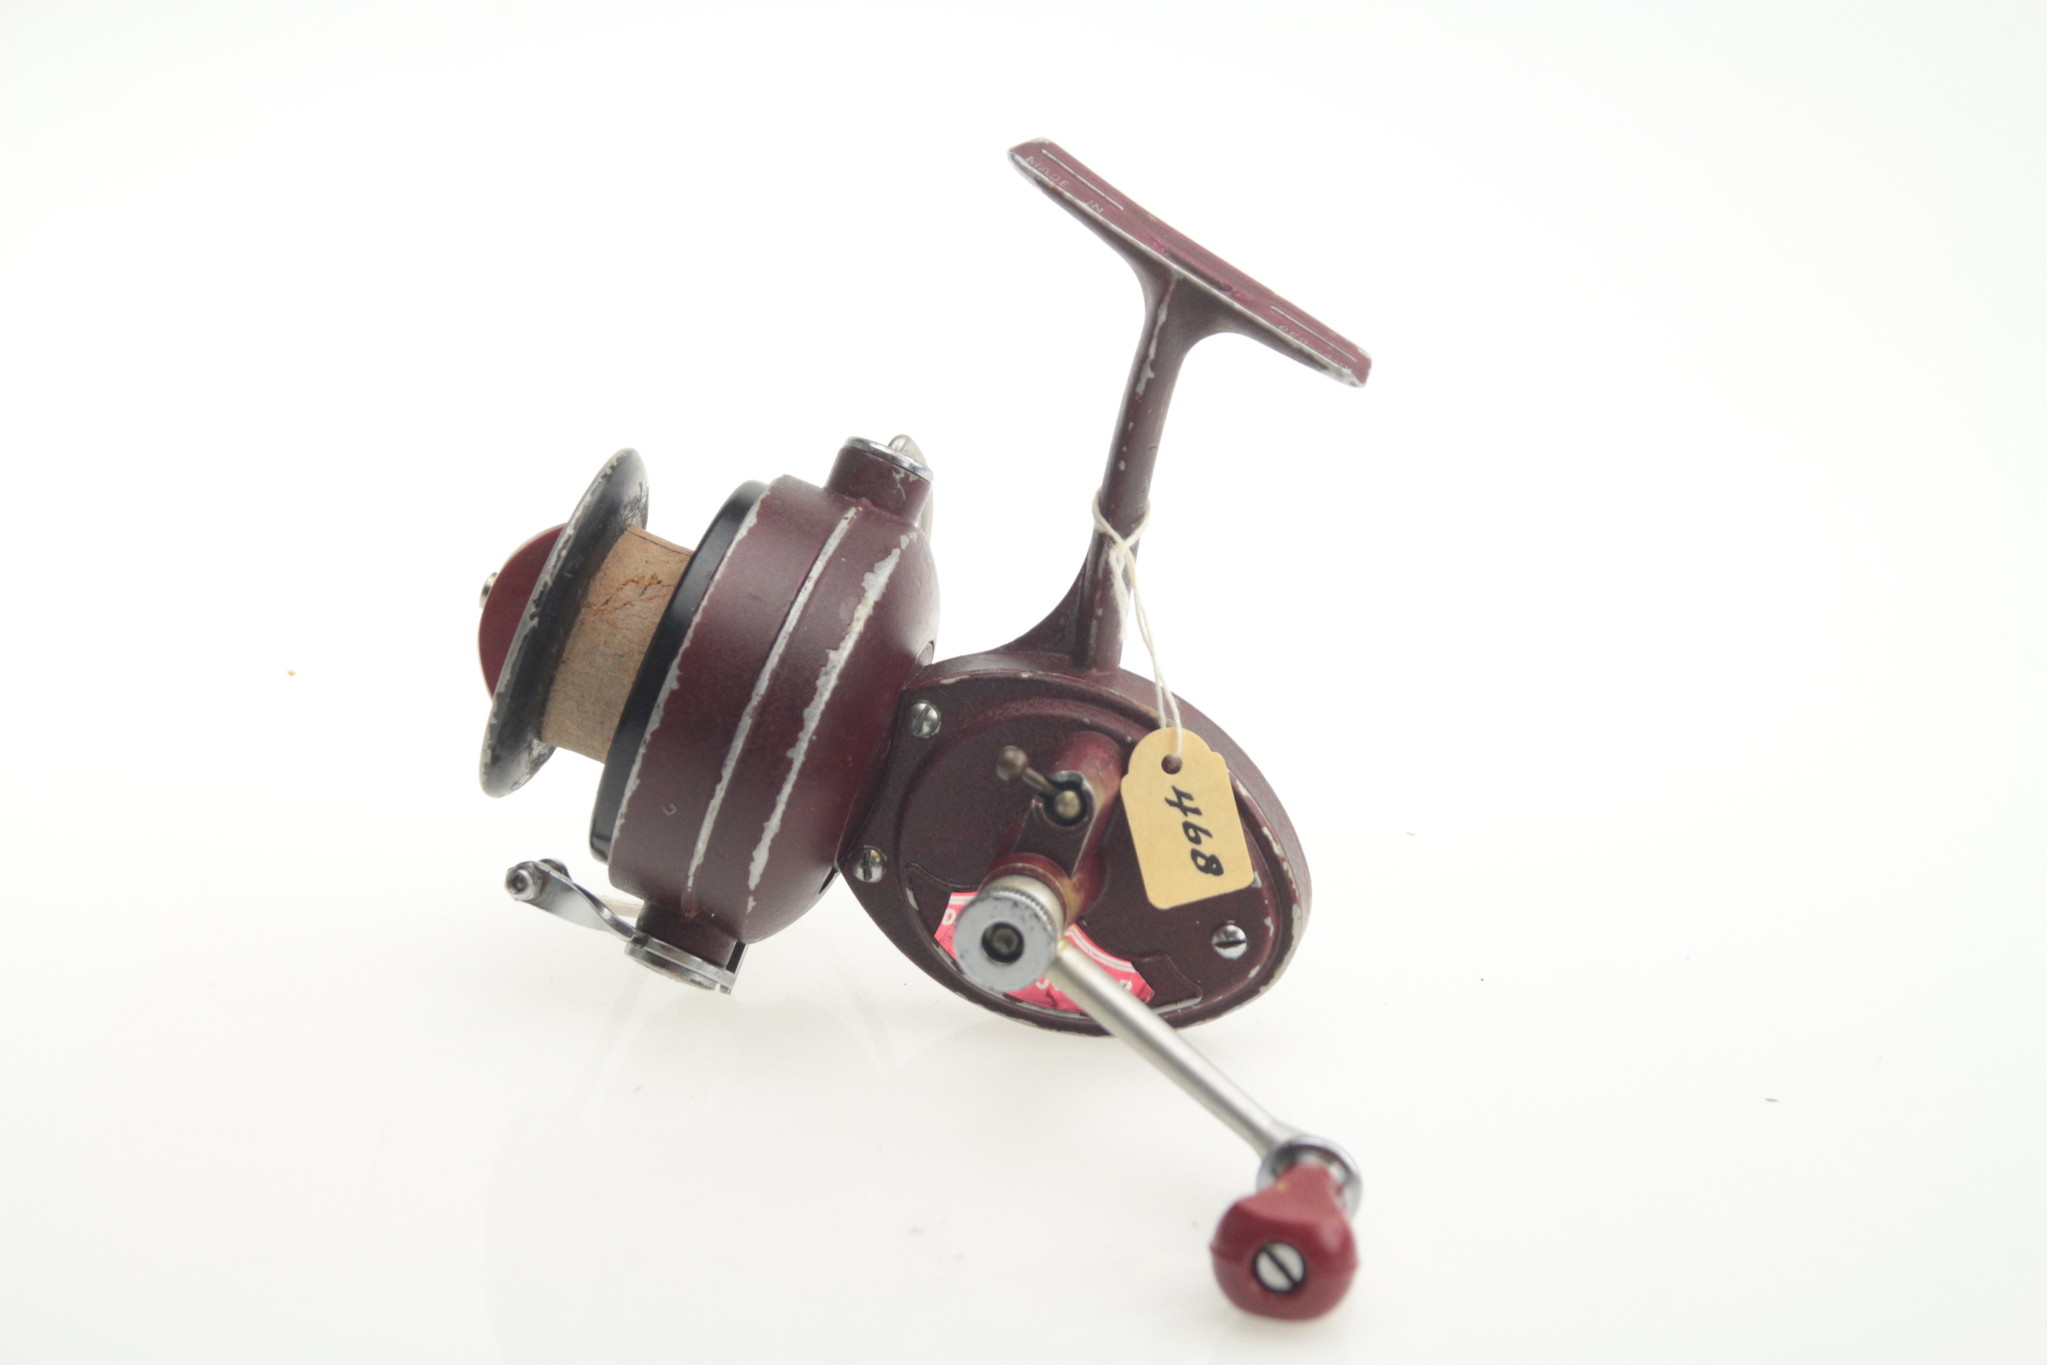 Vintage DAM quick junior 240 red | made in Germany | spinning reel